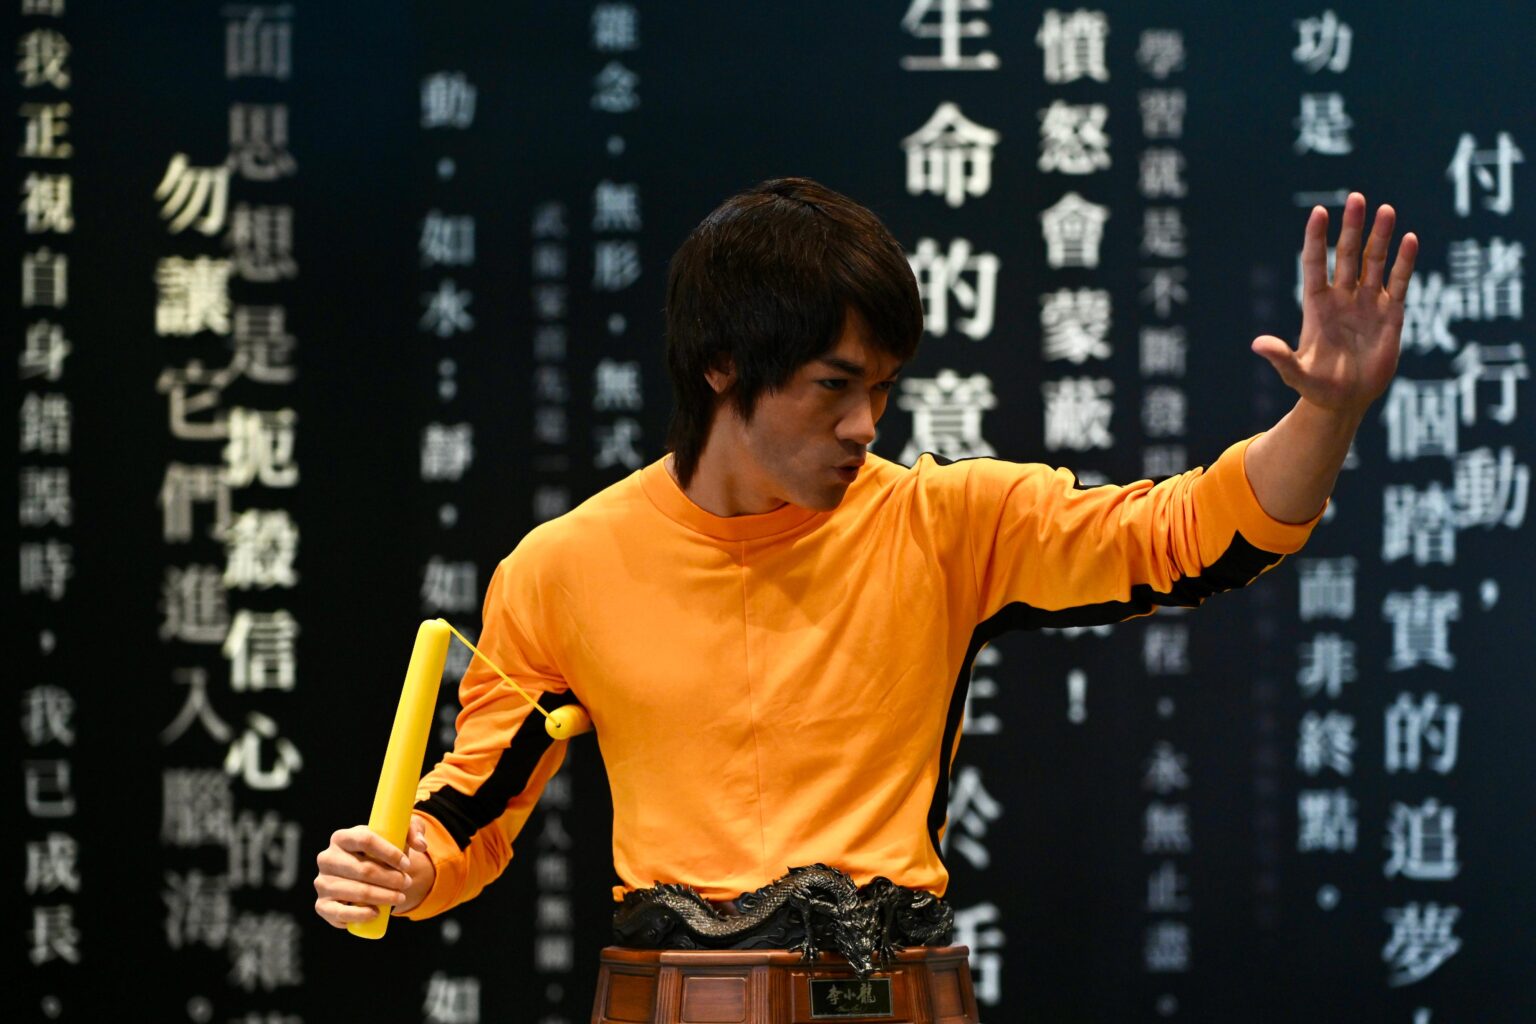 A life-size bust of Bruce Lee at the Hong Kong Heritage Museum. The replica of Bruce Lee is wearing a yellow long-sleeved short and is holding nunchucks.